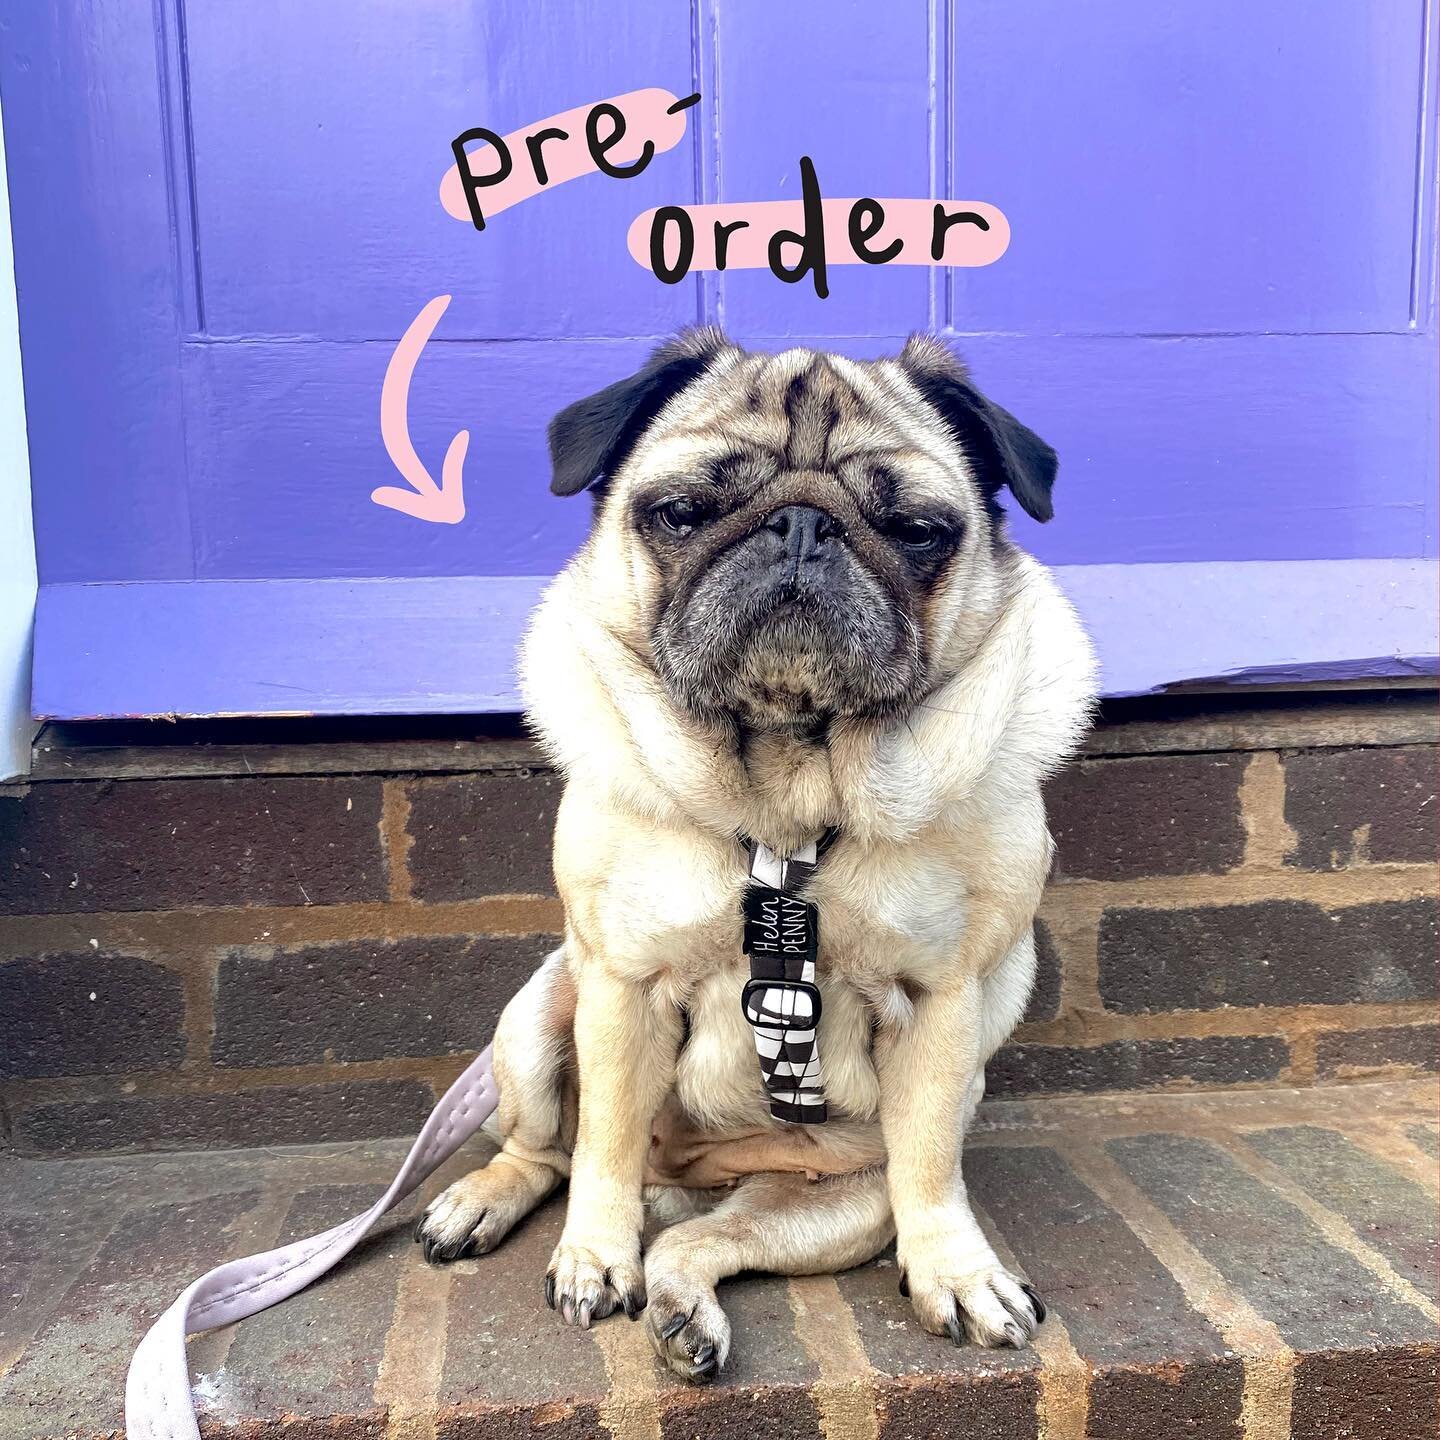 😱 IT&rsquo;S TIME: Harness pre-orders are now open! ✨
AND&hellip; if you&rsquo;re quick, you might be one of the first 10 customers to get a very special pre-order price.

You won&rsquo;t find harnesses like these anywhere else &ndash; it&rsquo;s a 